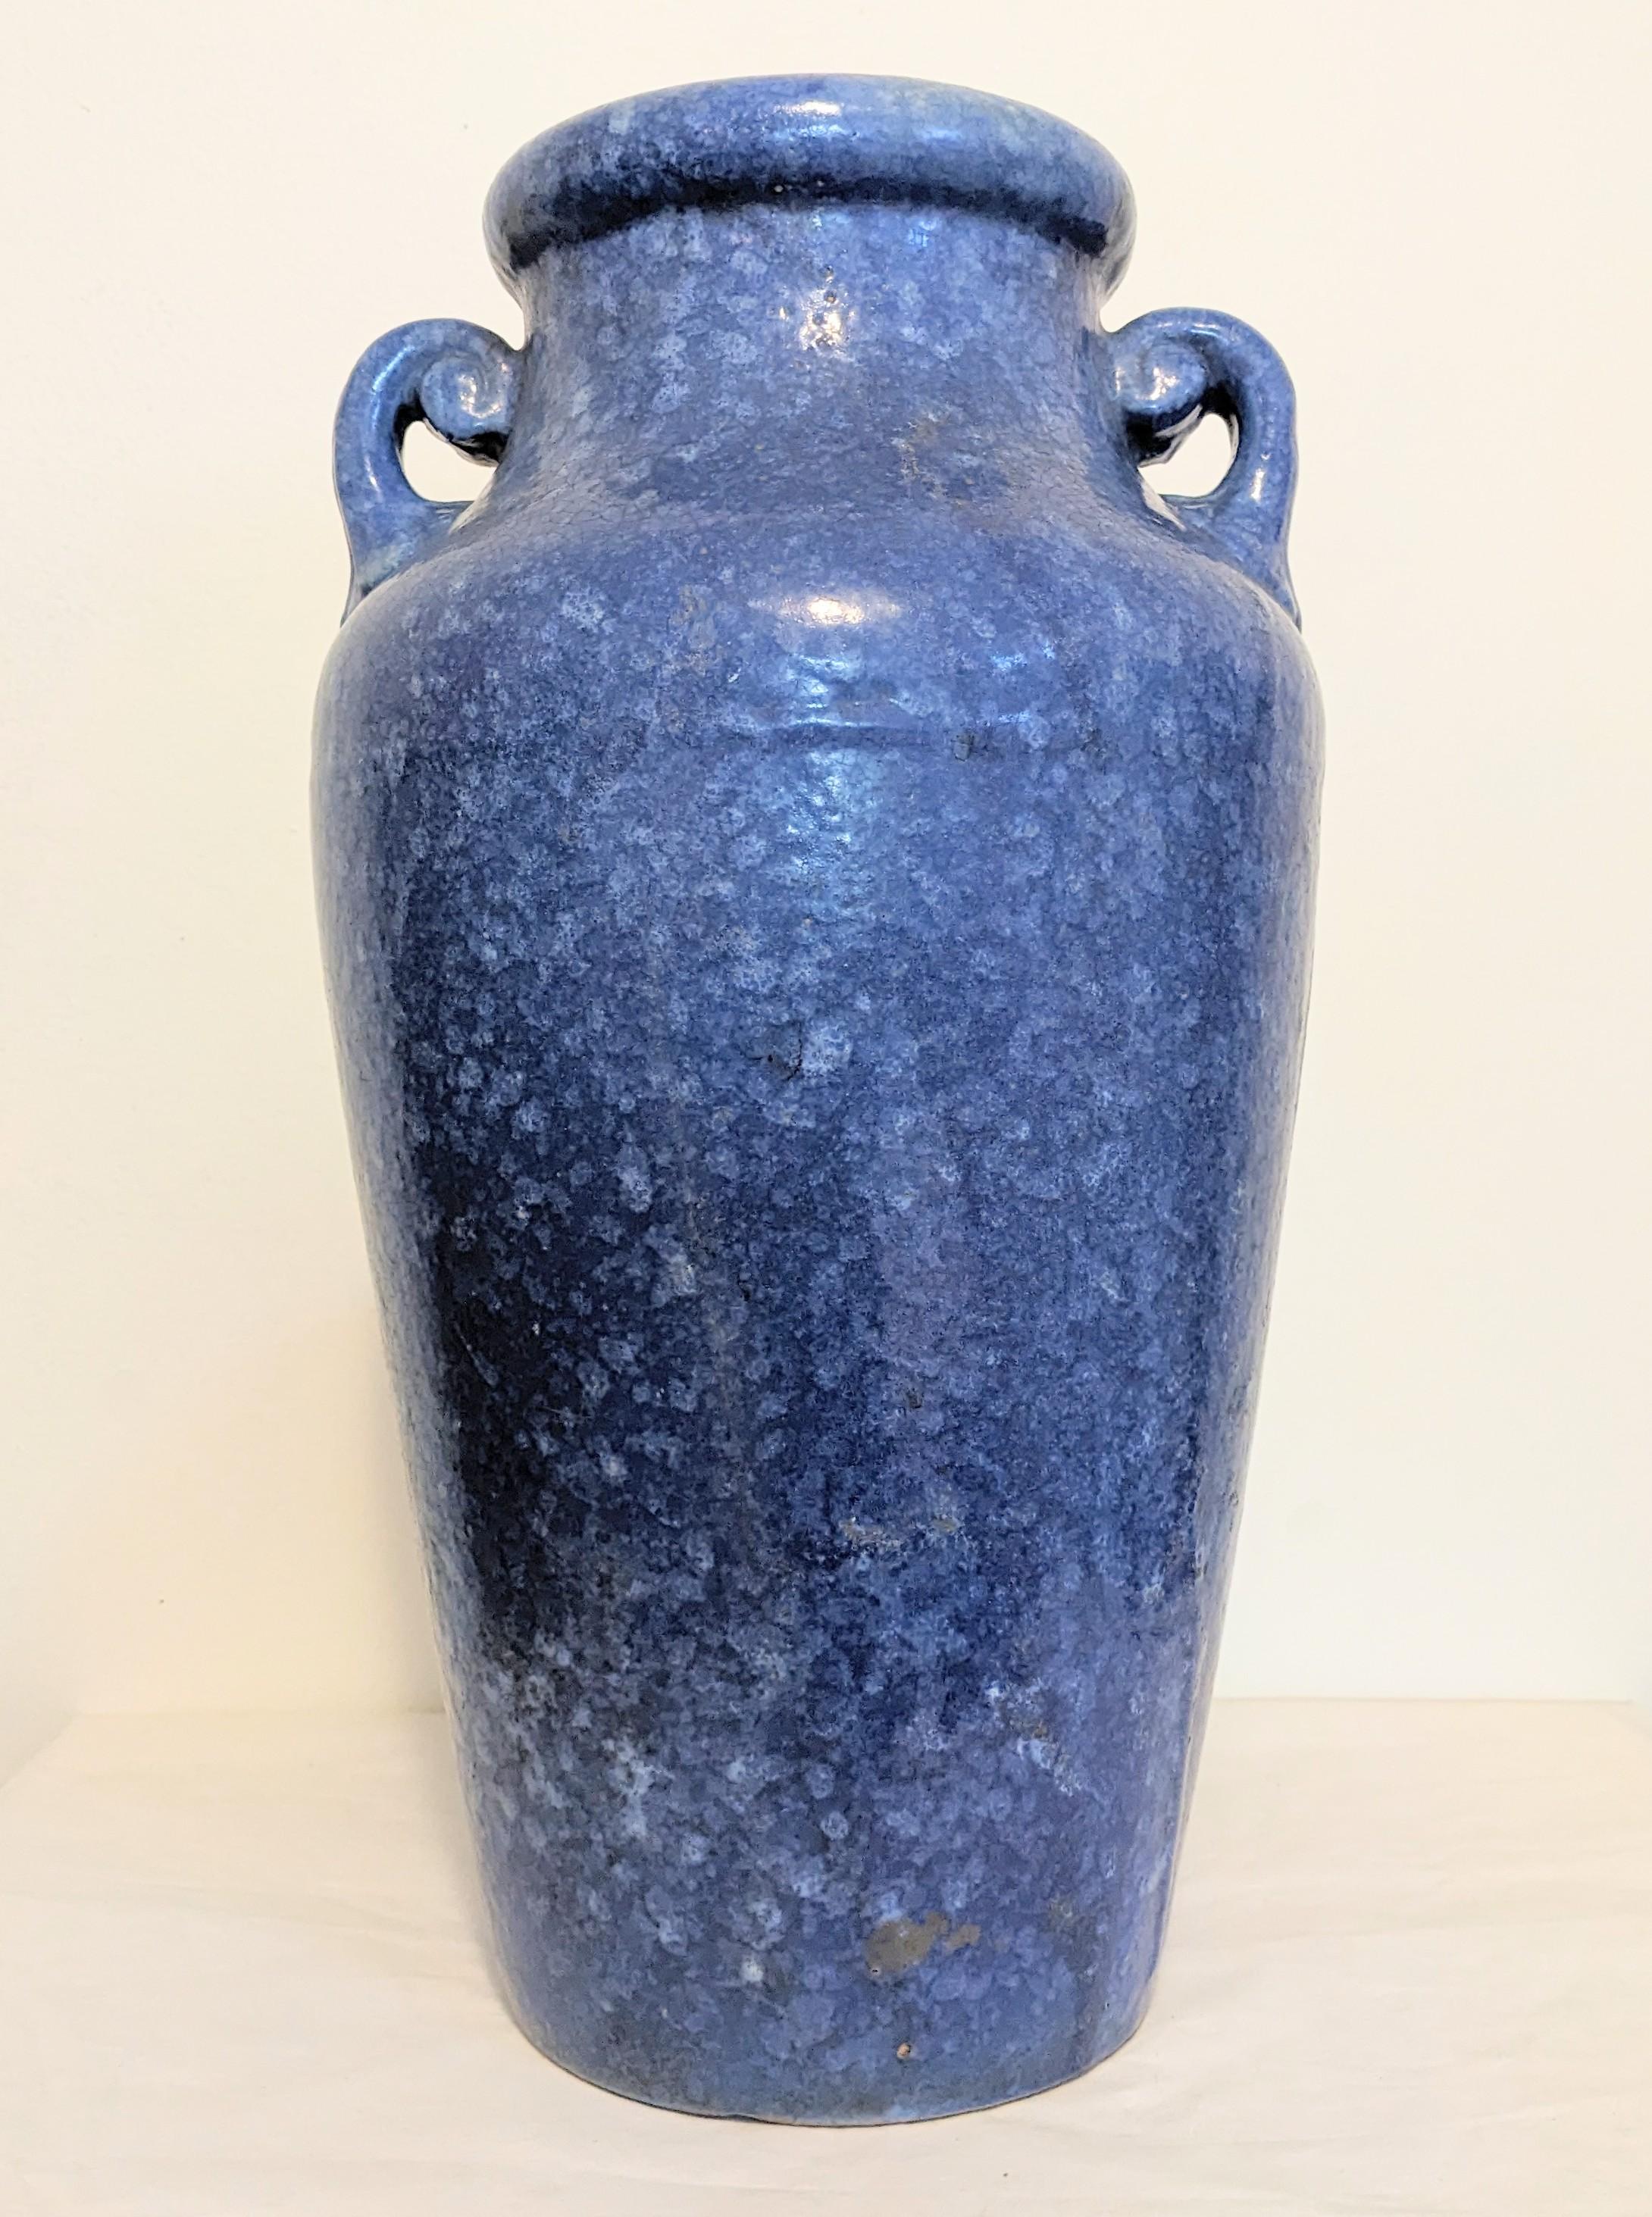 Imposing Weller Brush Art McCoy vase in mottled blues circa 1930's. Unusual large size with decorative spiral 